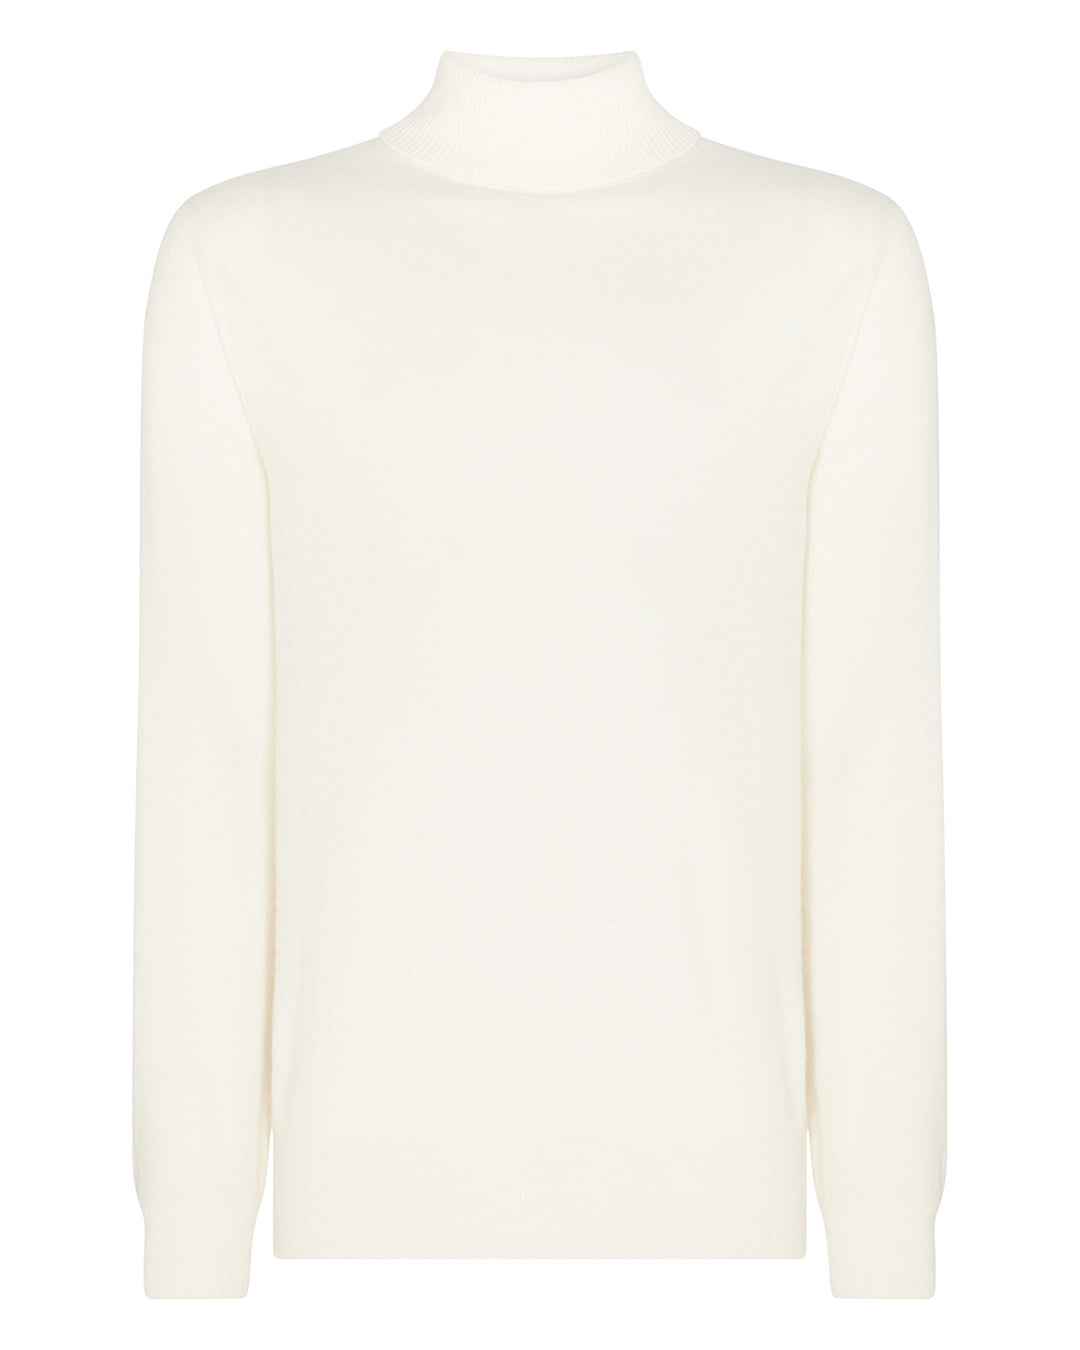 007 Cashmere Roll Neck Sweater